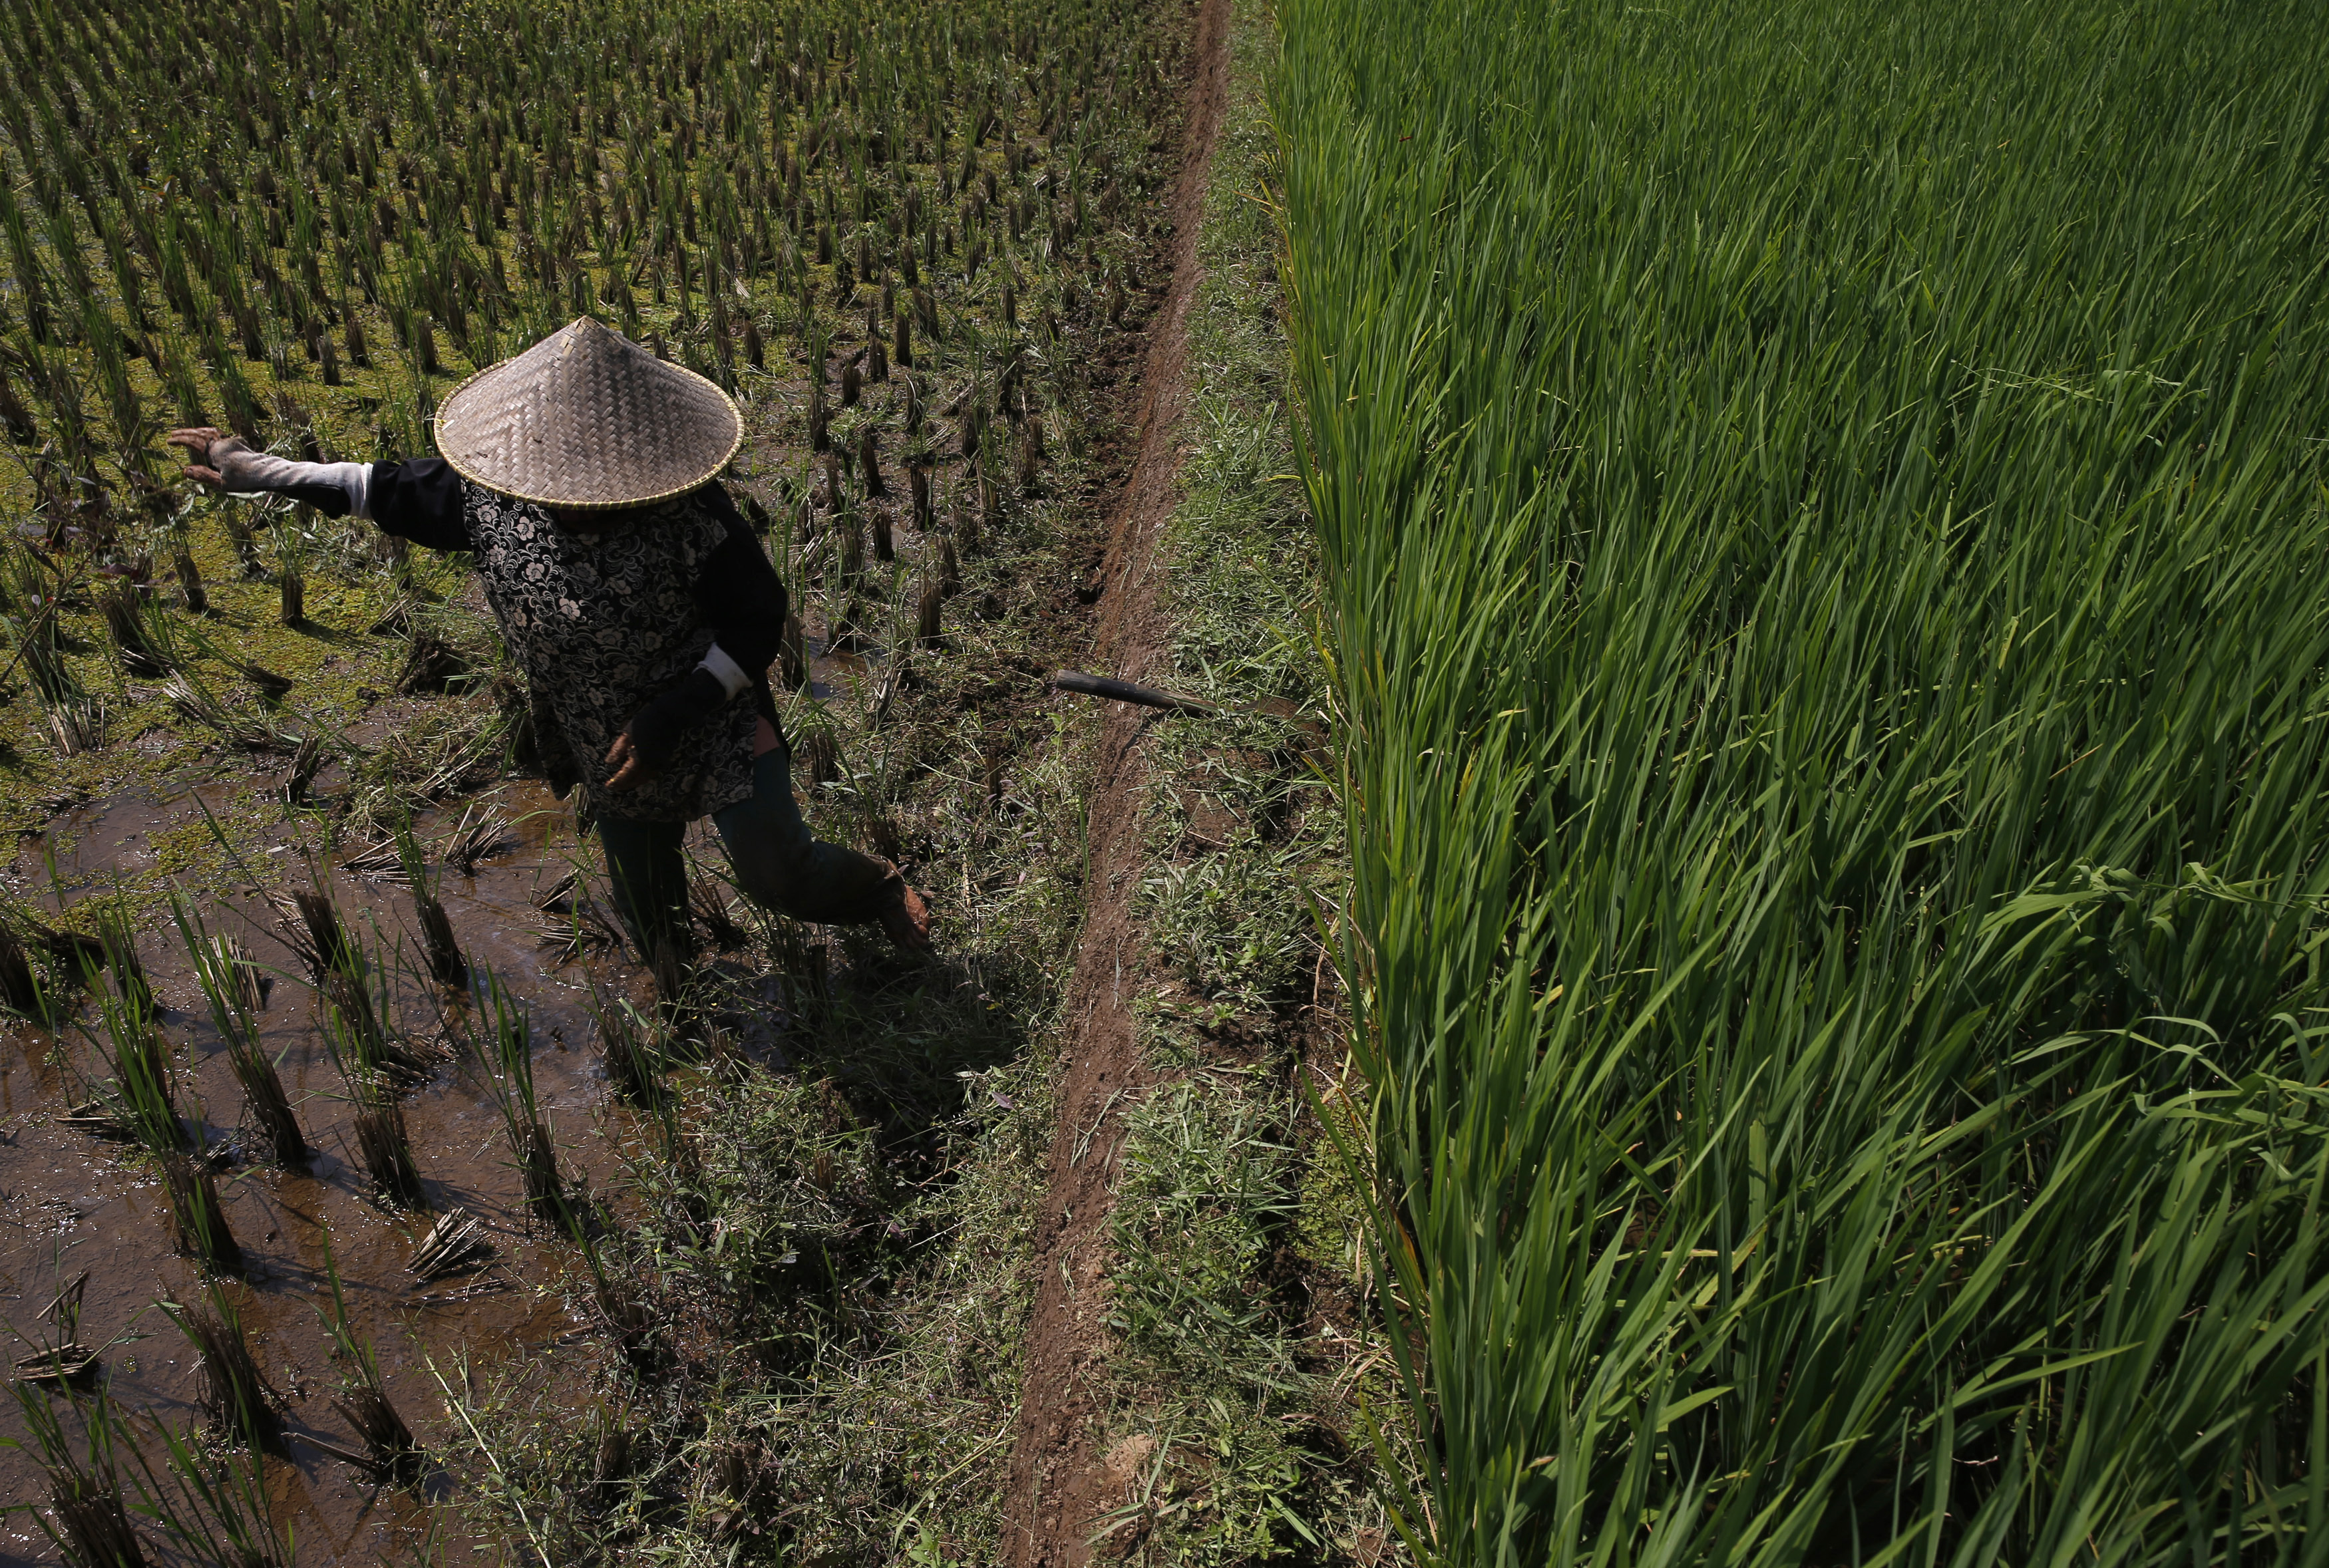 A farmer clears weeds from his crop in a rice paddy field near Subang, Indonesia's West Java province